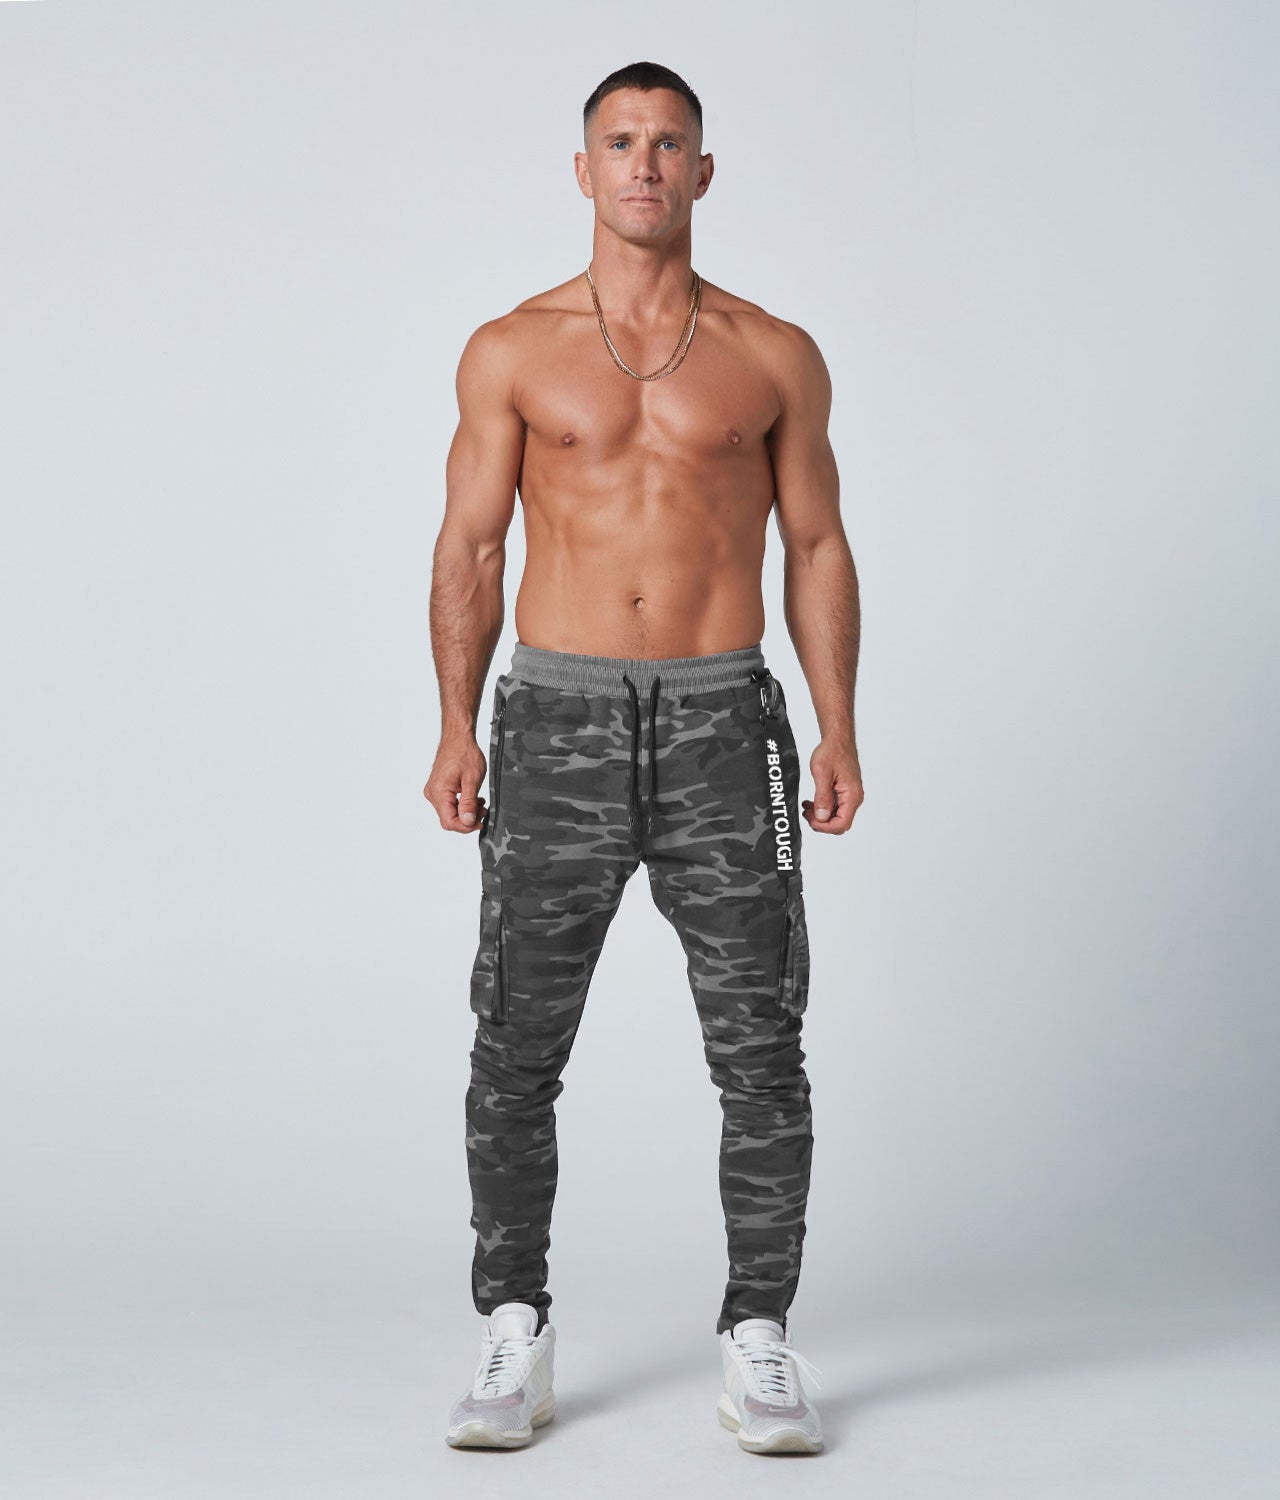 Los Angeles Sports Fitness Gym Trousers For Men For Men Loose Fit